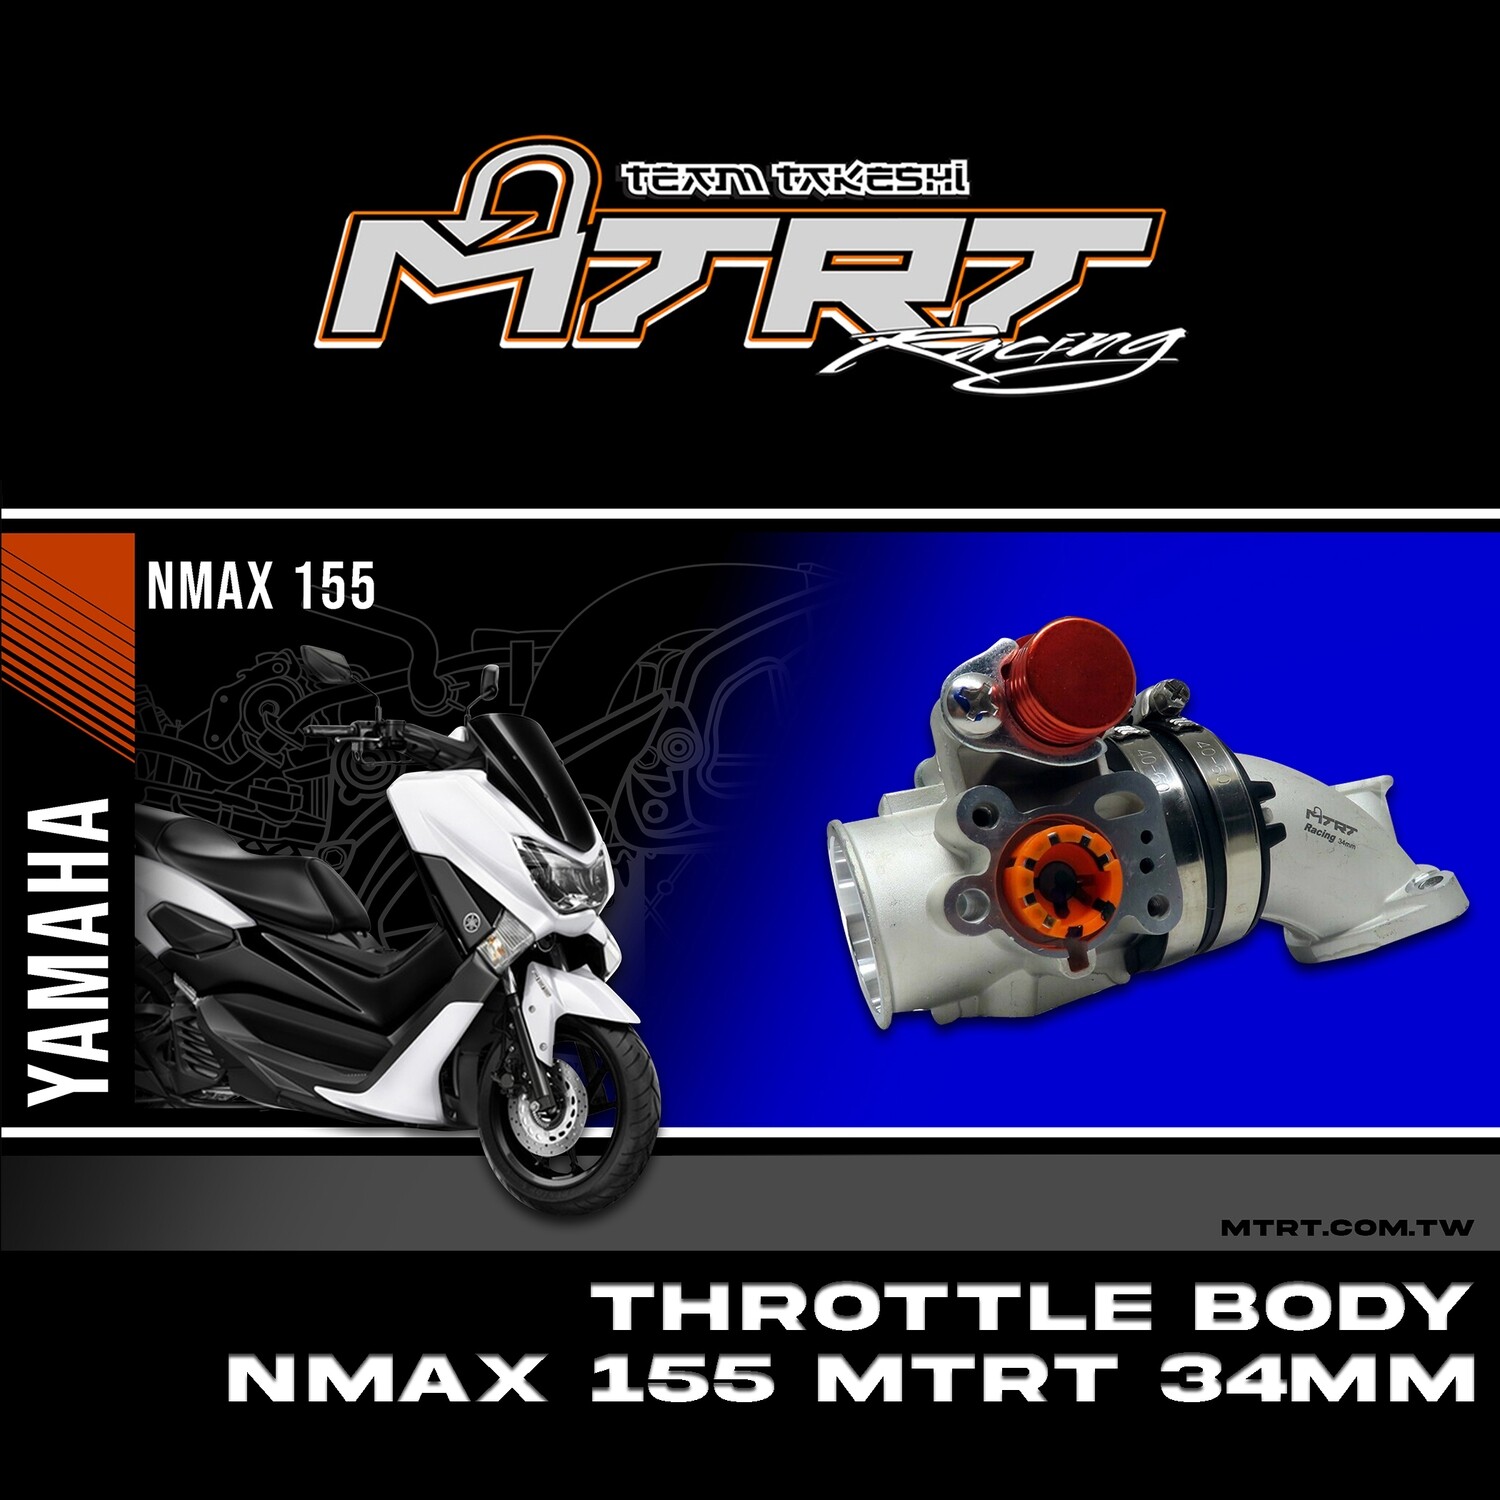 THROTTLE BODY NMAX155 34MM w/out MANUAL ISC MTRT